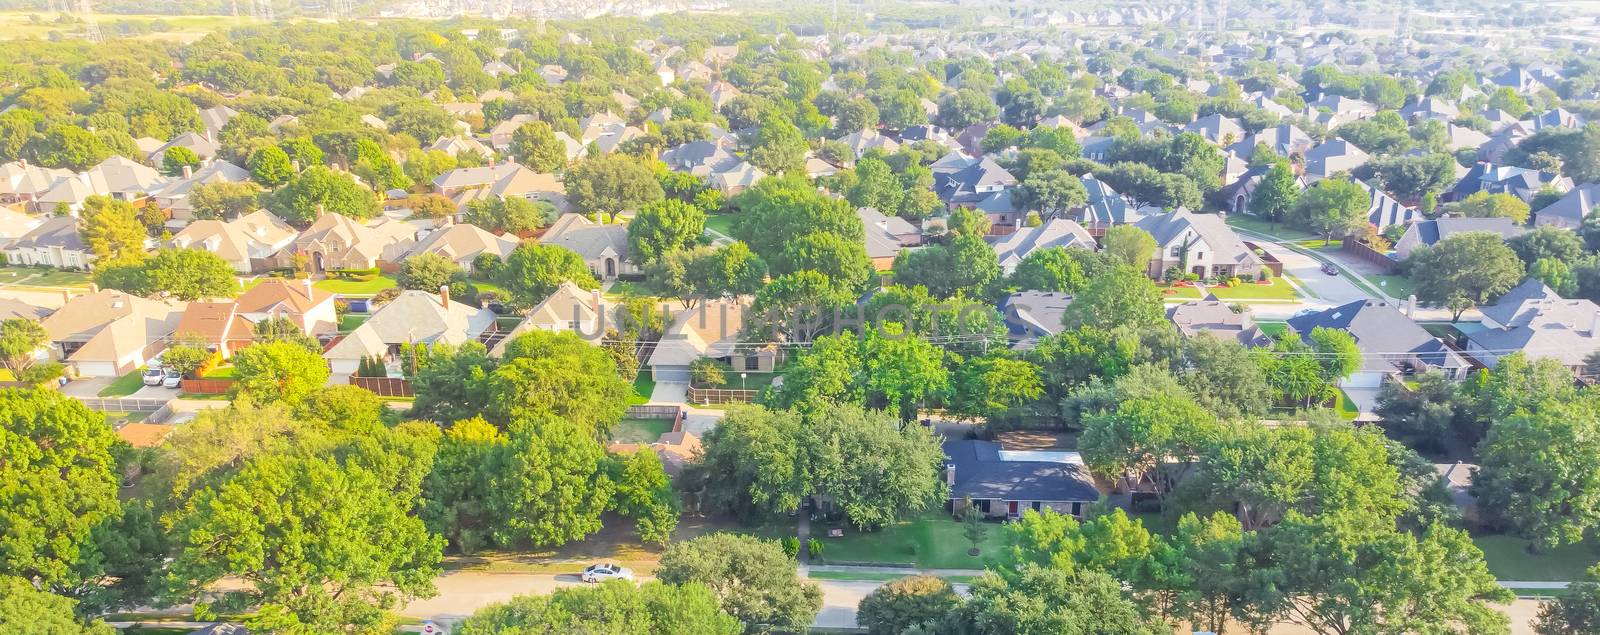 Panoramic Urban sprawl near Dallas, Texas, USA with row of single family houses and large fenced backyard. Aerial view residential neighborhood subdivision surrounded by mature trees